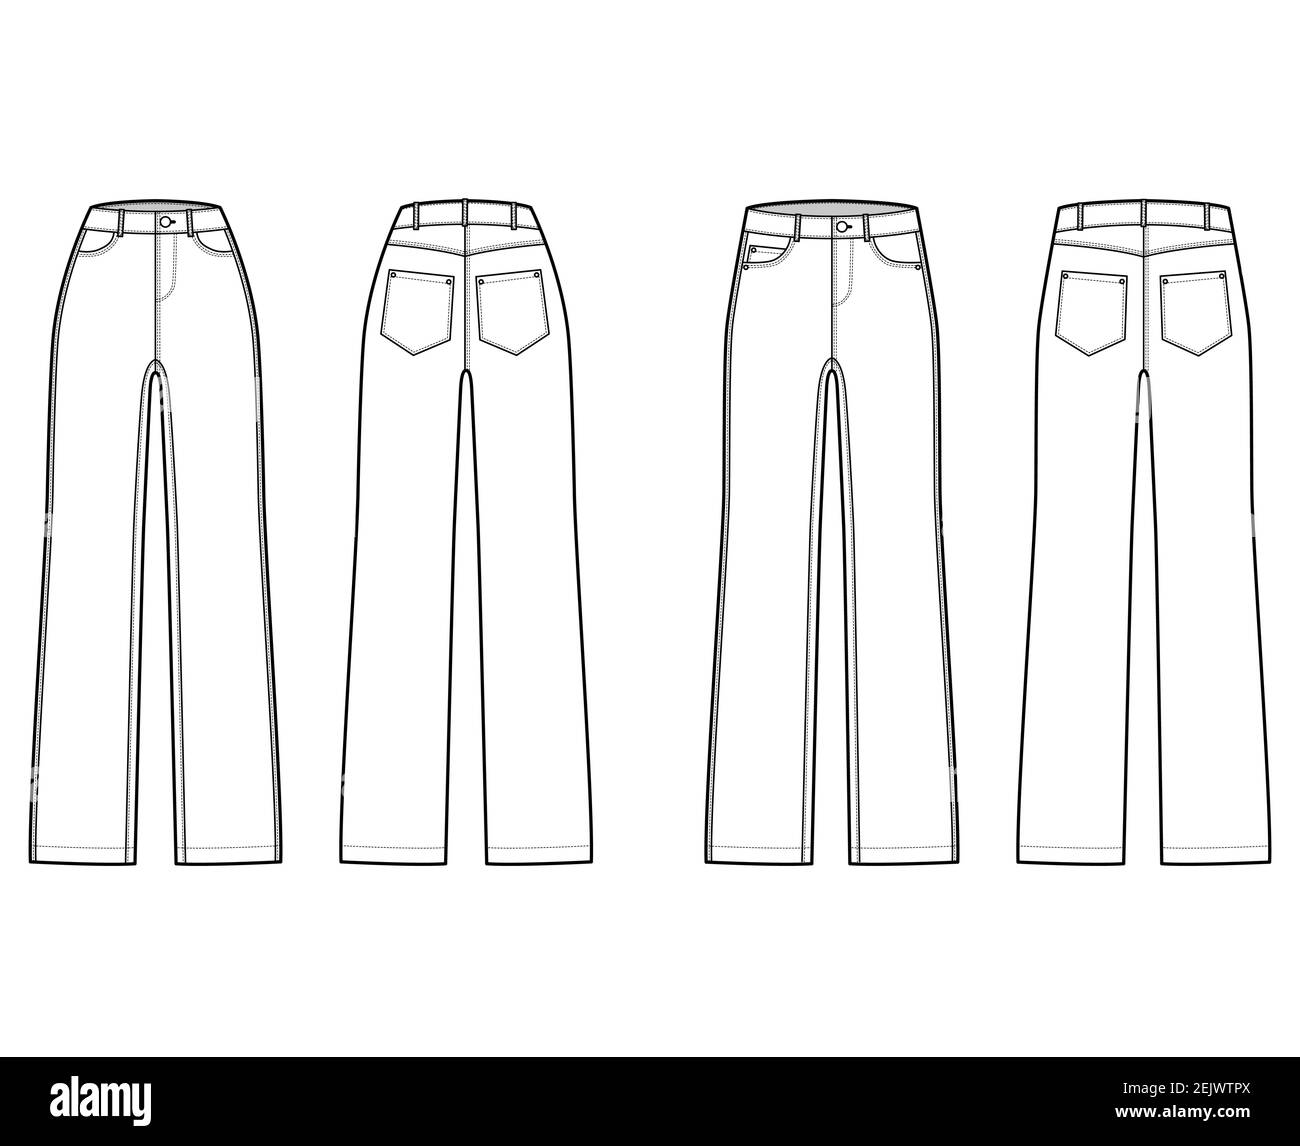 Set of Straight Jeans Denim pants technical fashion illustration with ...